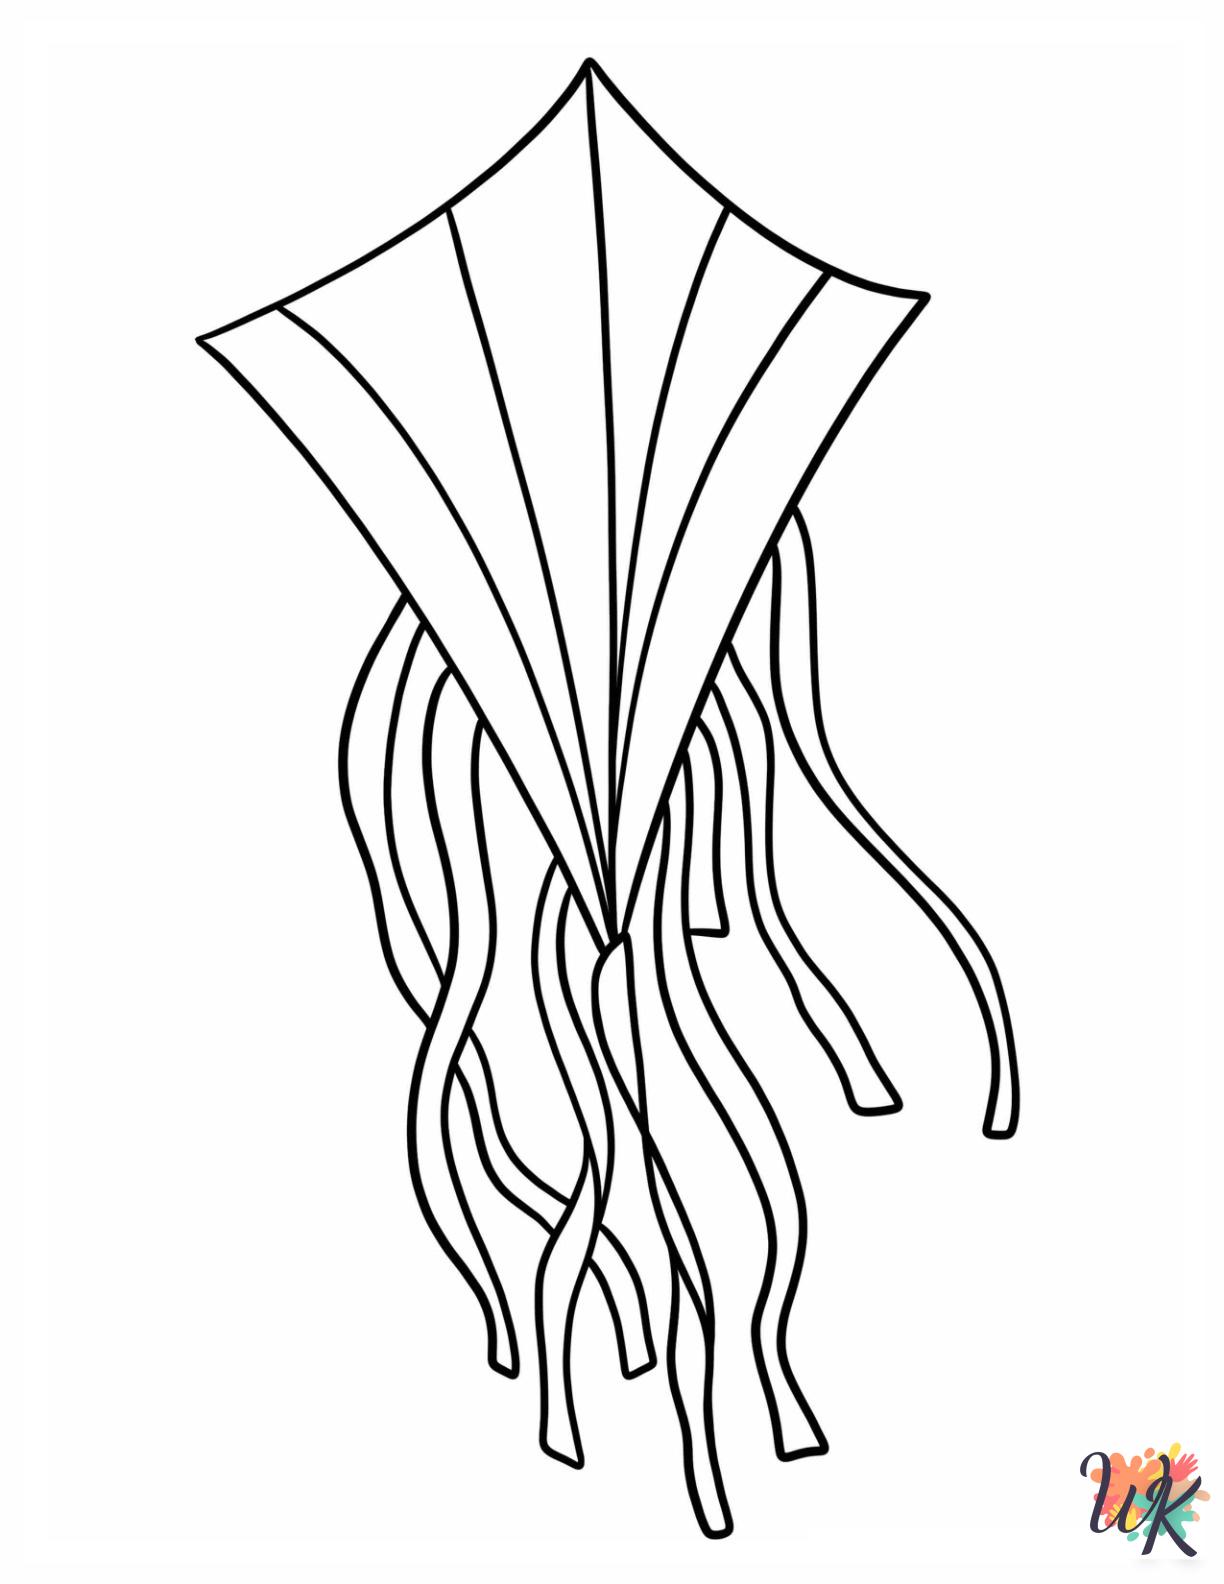 Kite Coloring Pages 7